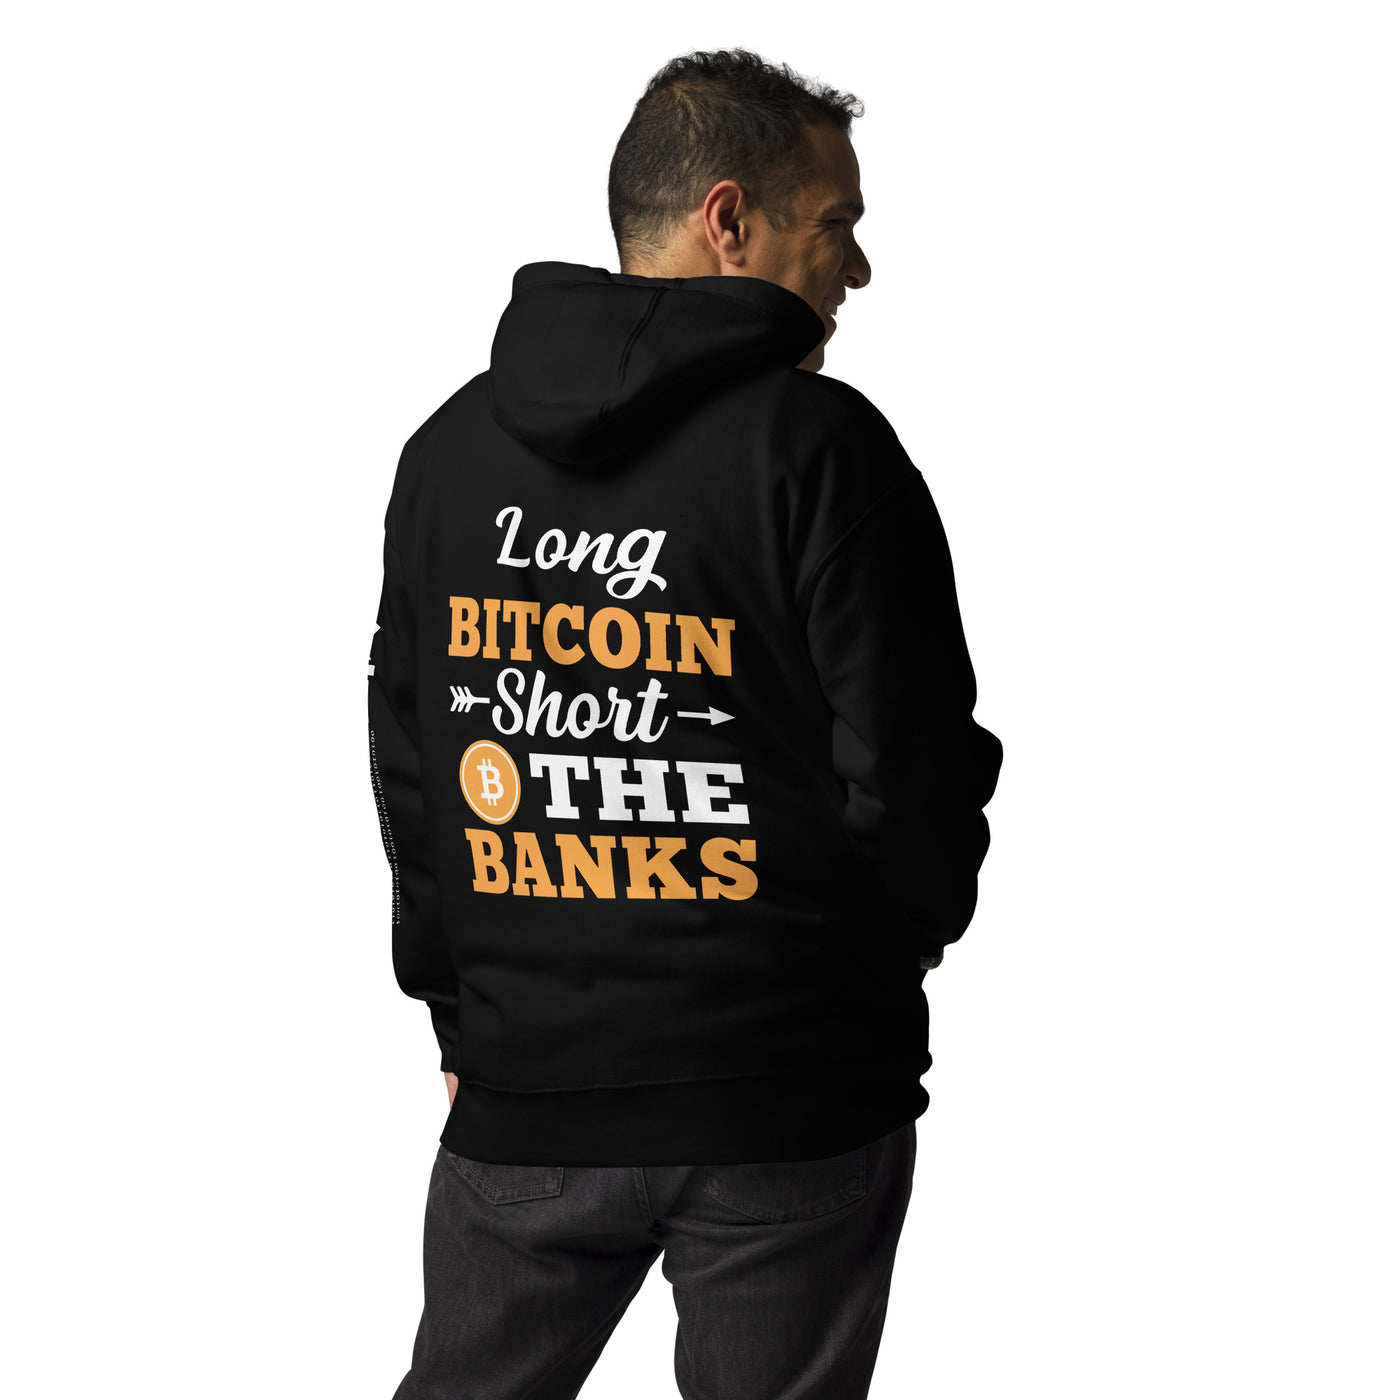 Long Big Coin, Short the Banks - Unisex Hoodie ( Back Print )